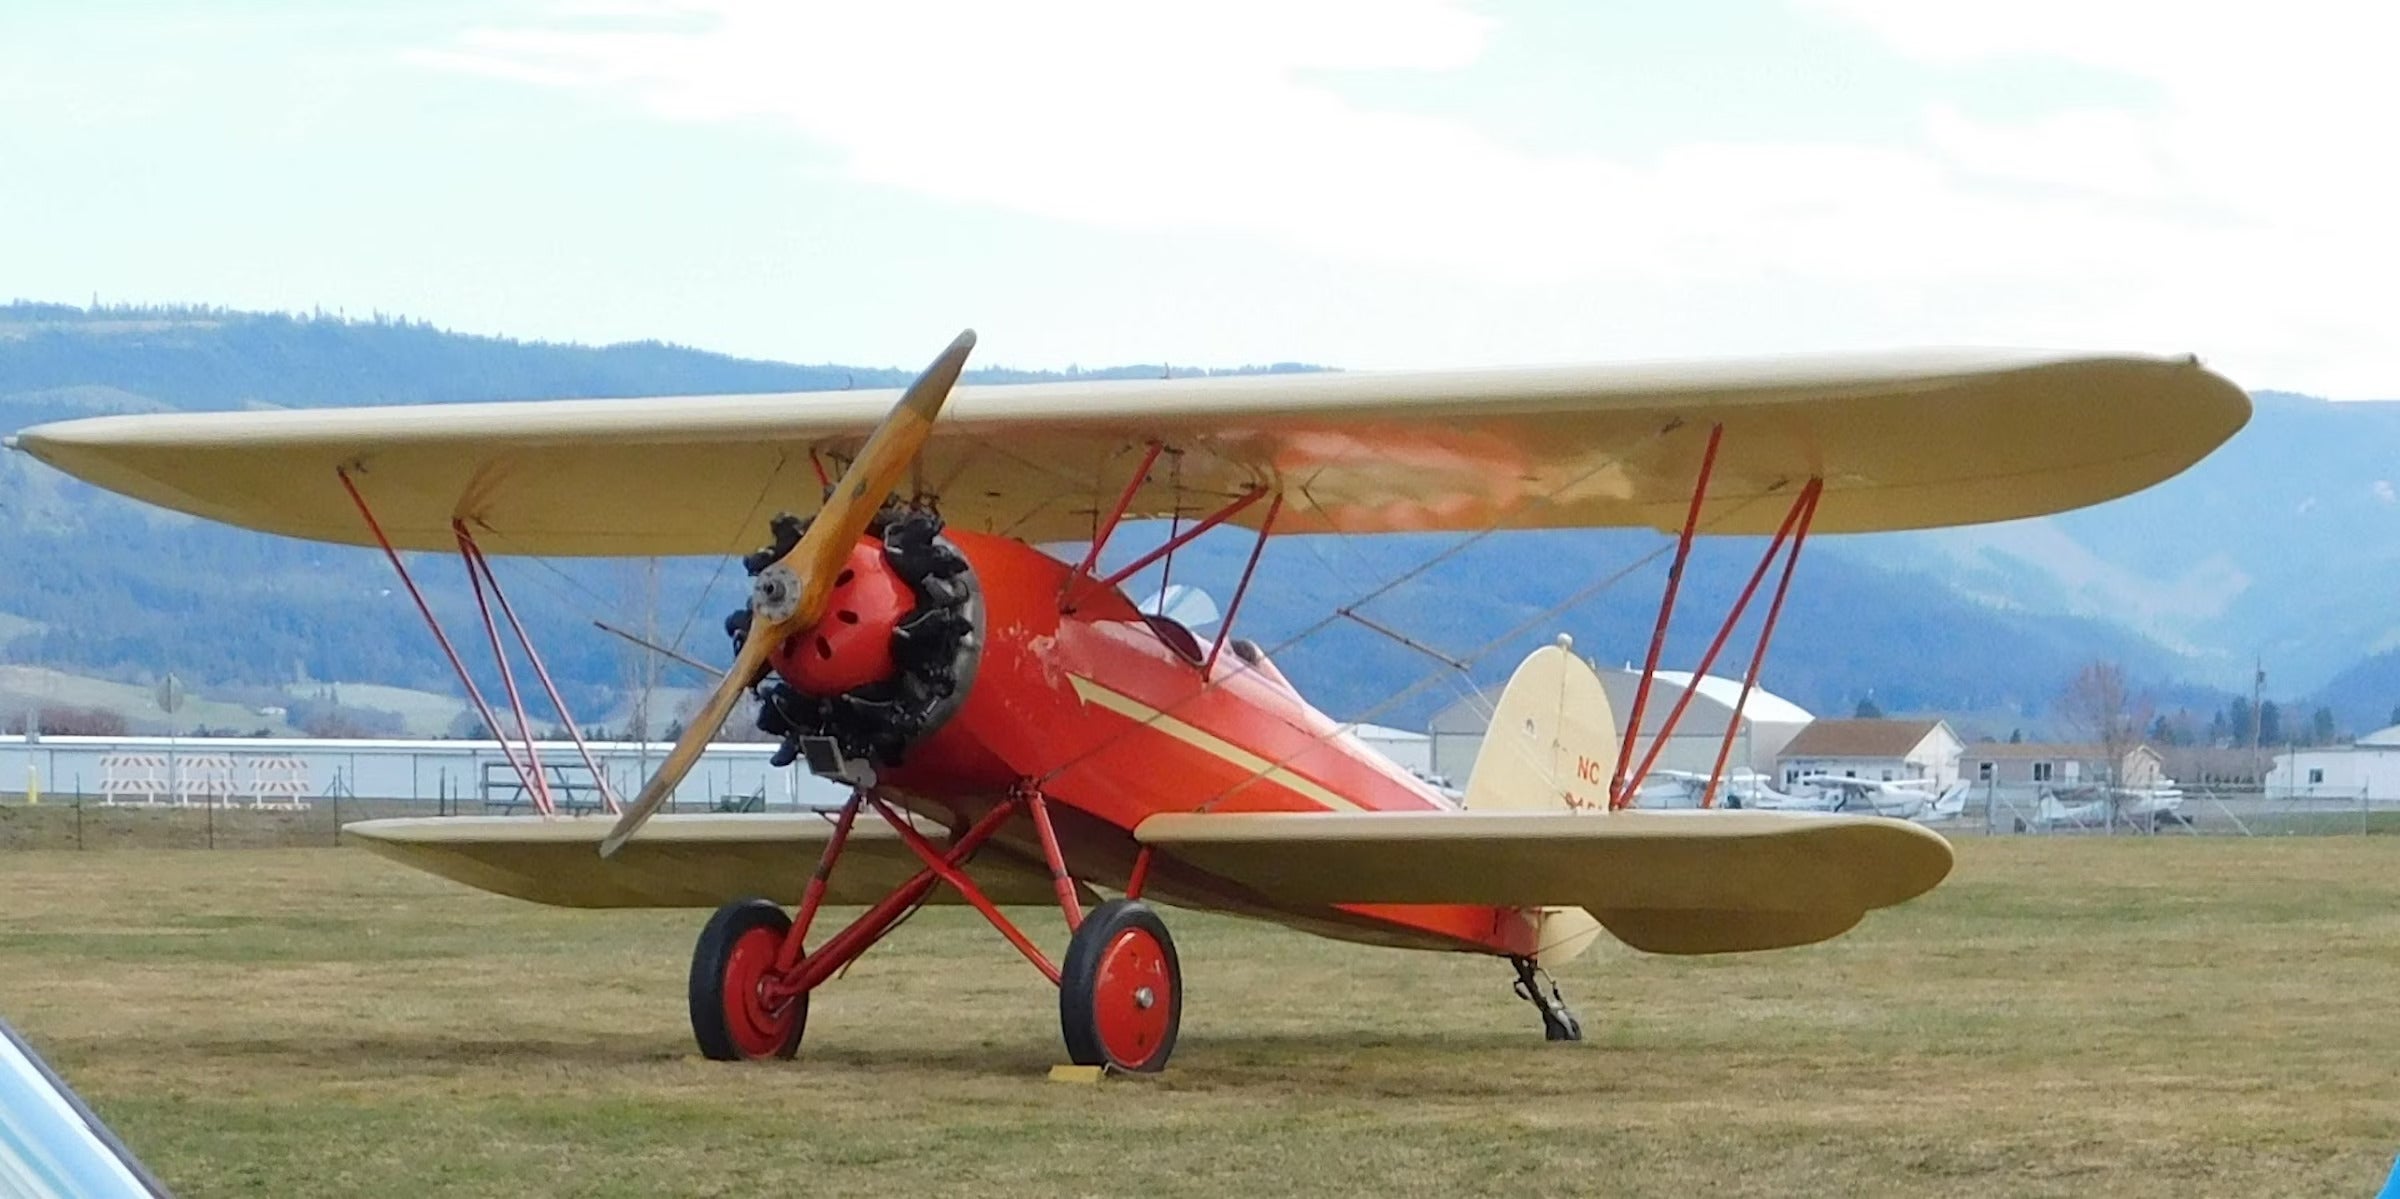 This 1929 Brunner-Winkle Bird Model A Is a Golden Age ‘AircraftForSale’ Top Pick